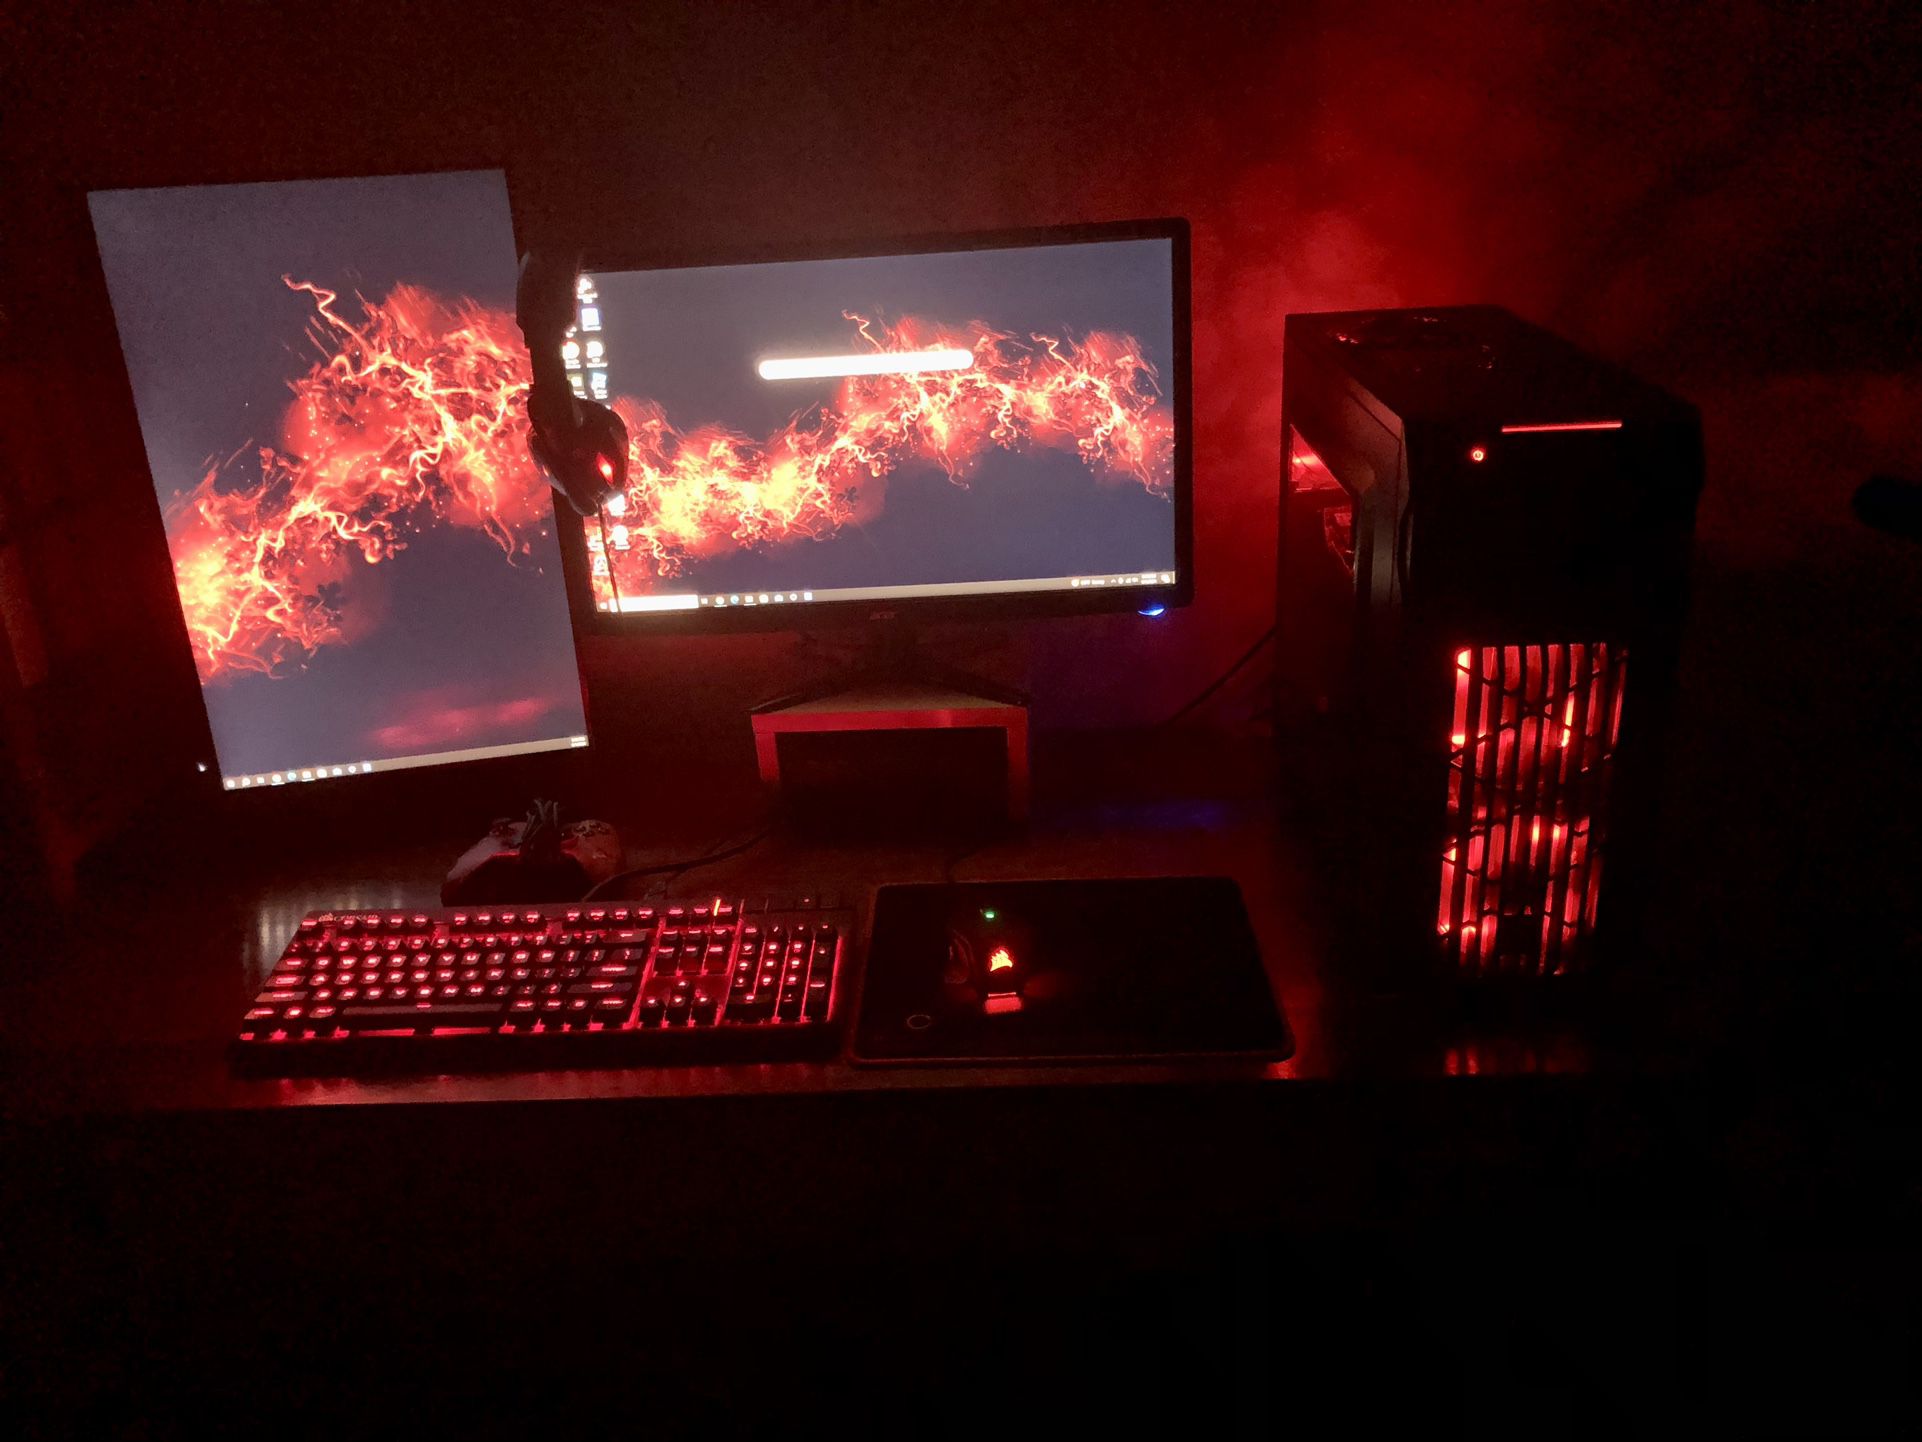 Gaming PC + Monitors + Accessories